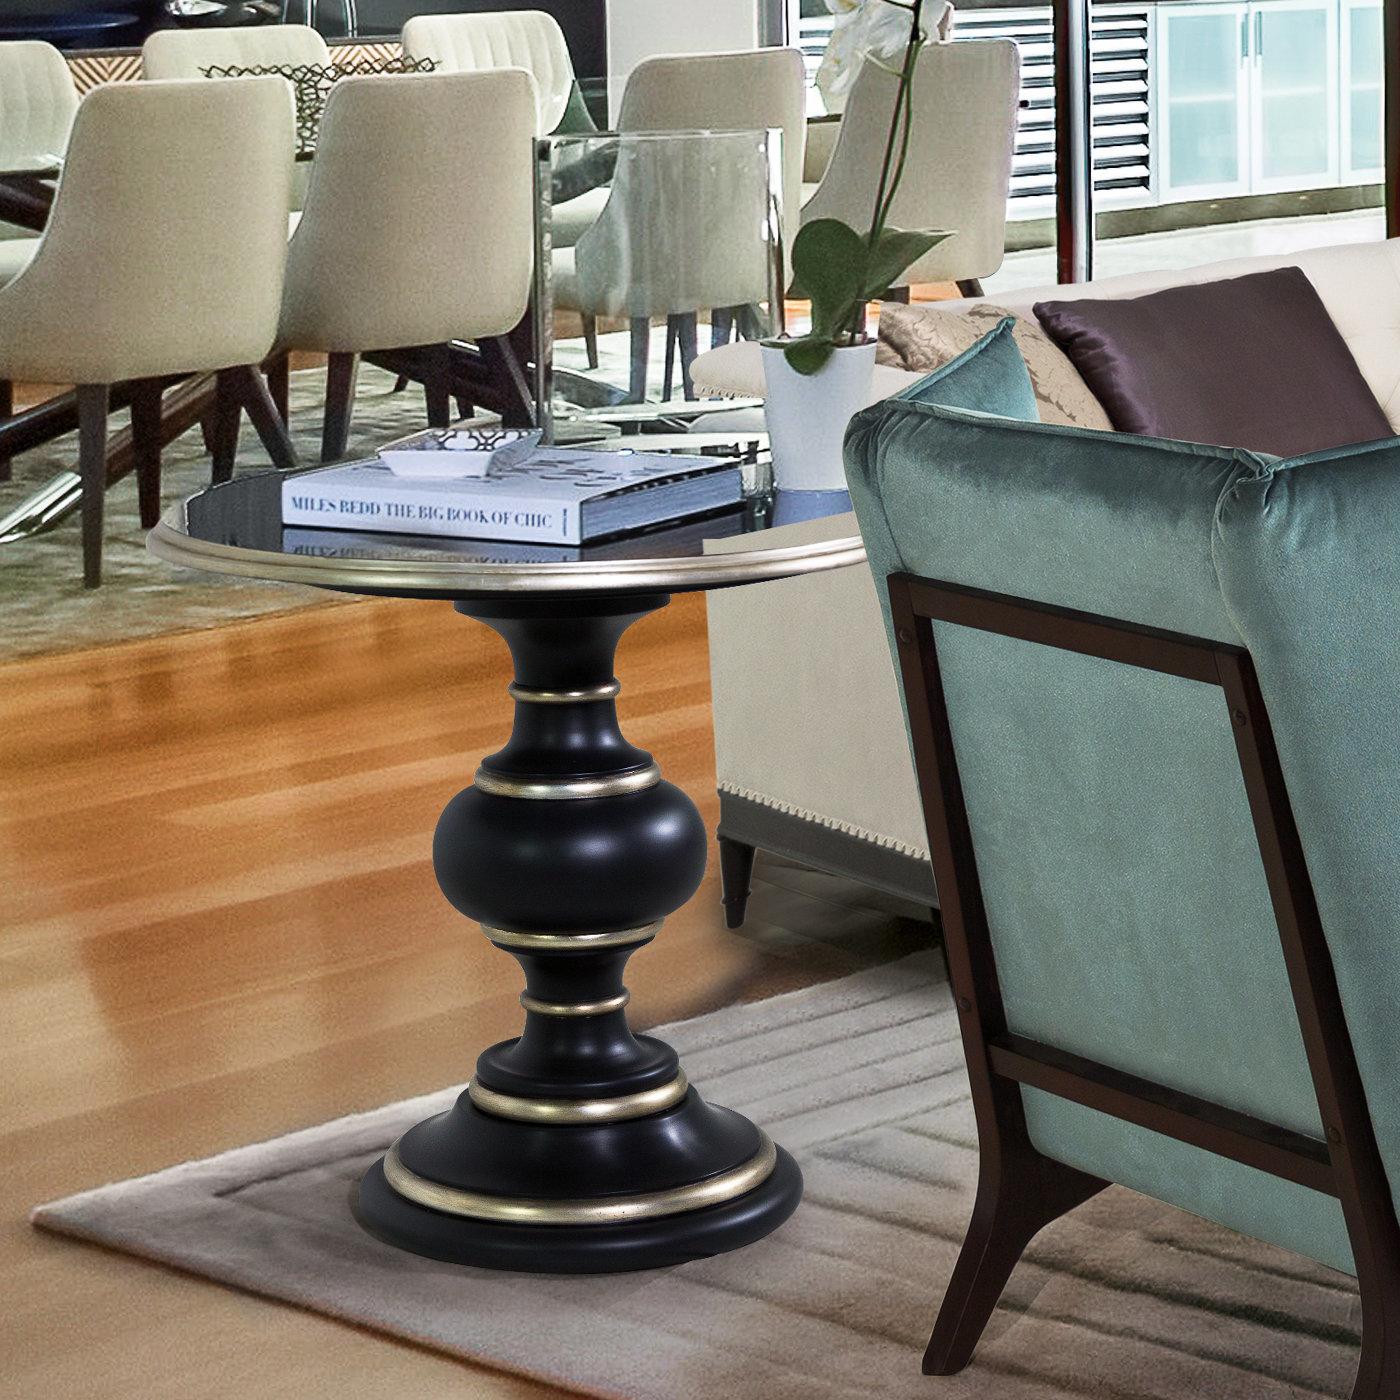 This enthralling coffee table marked by a captivating silhouette will capture the eye in any modern or classic decor with its sculptural and opulent look. The MDF structure stained in glossy colonial black is brightened up by profiles covered in